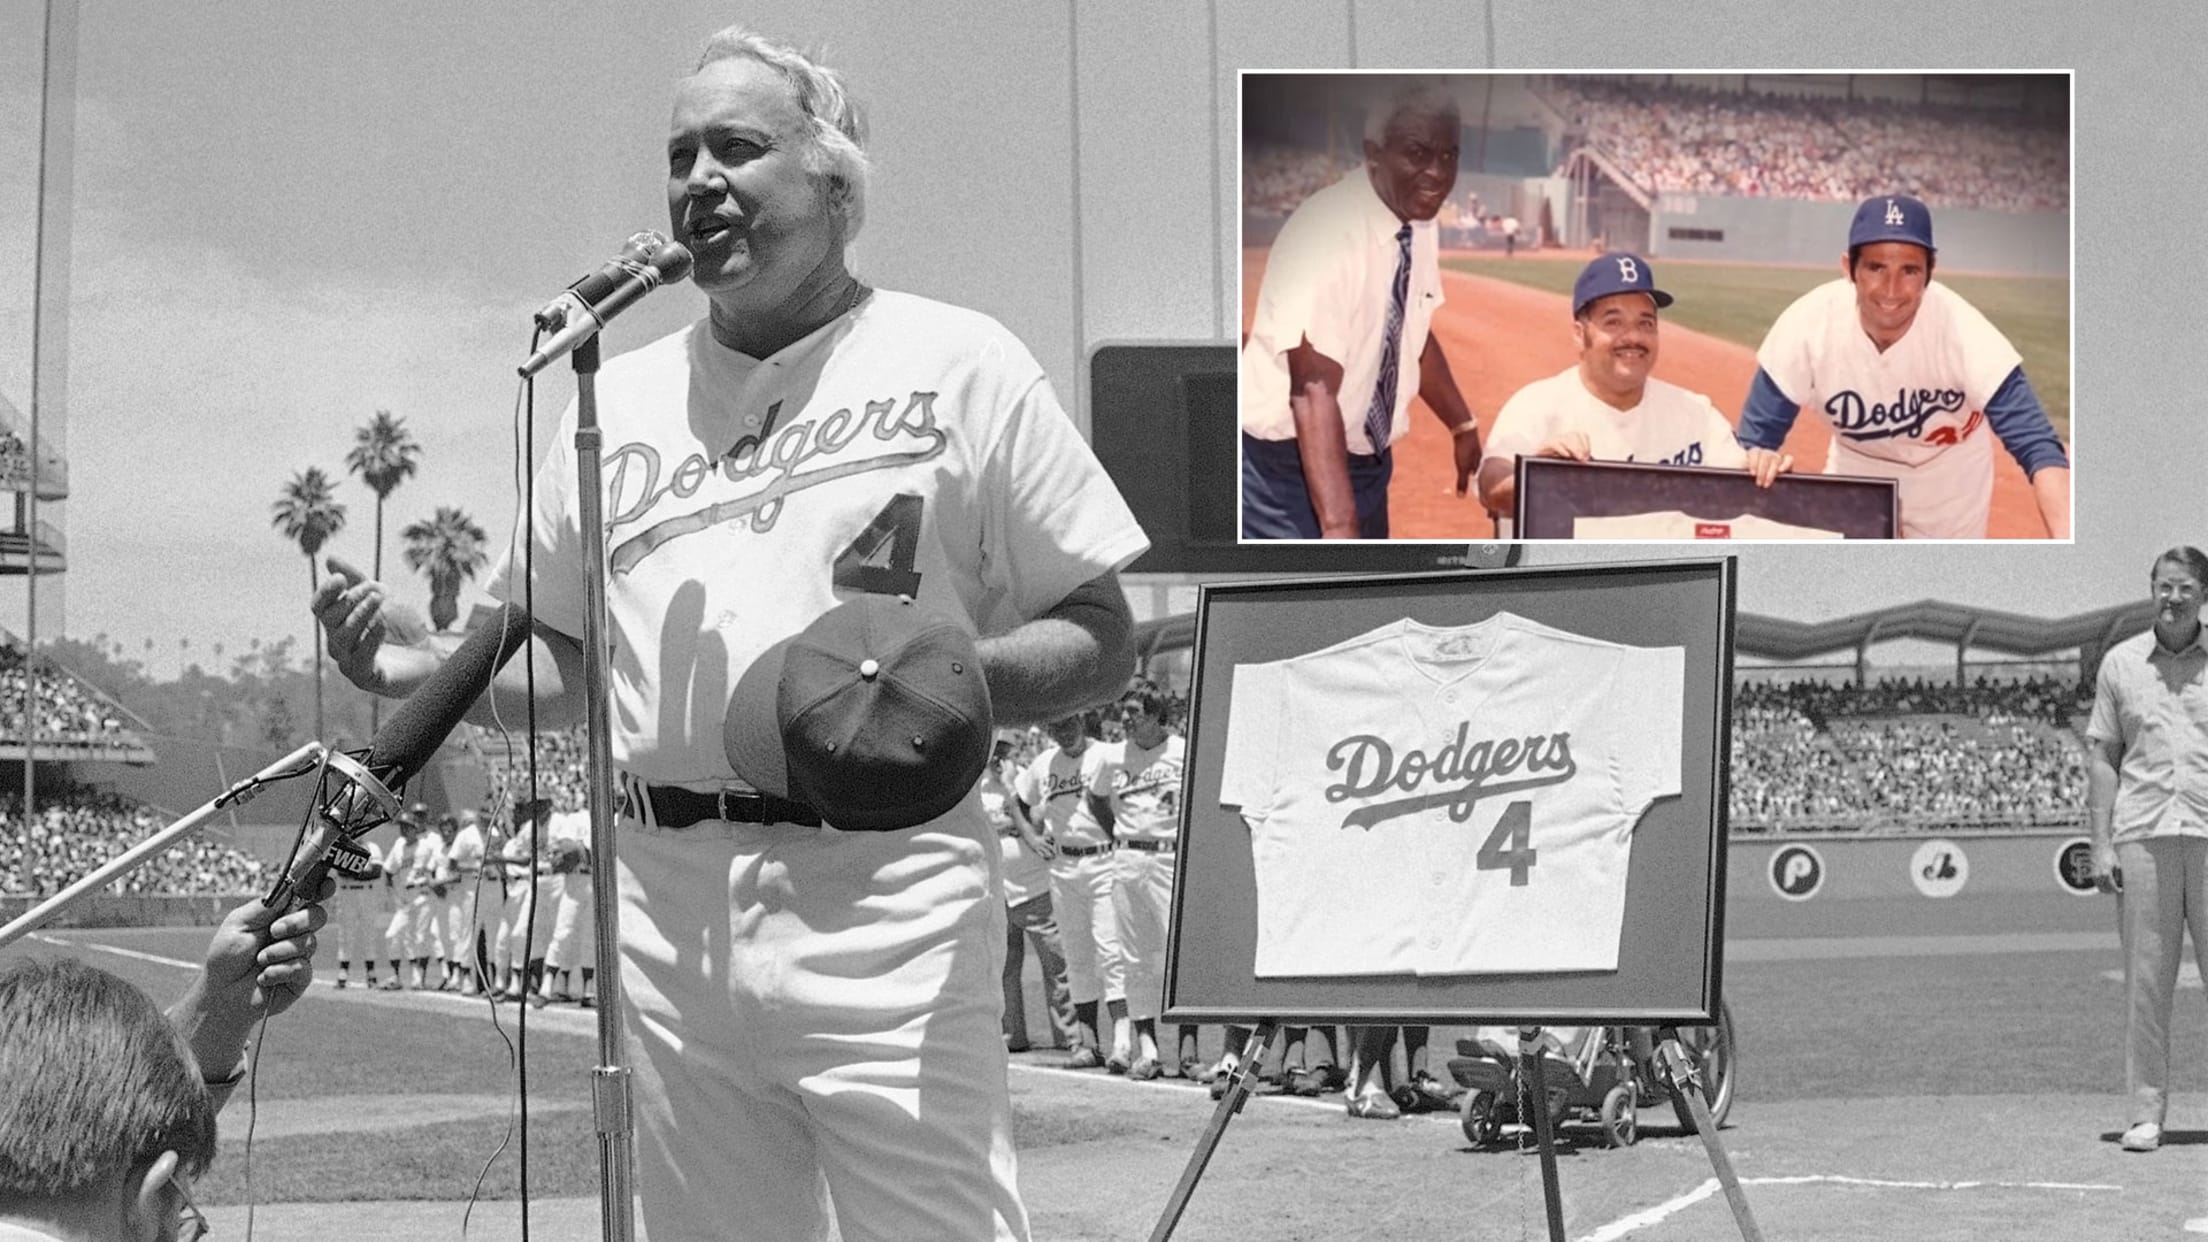 Dodgers Retired Numbers & Bandits: Who Are They Retired For, and